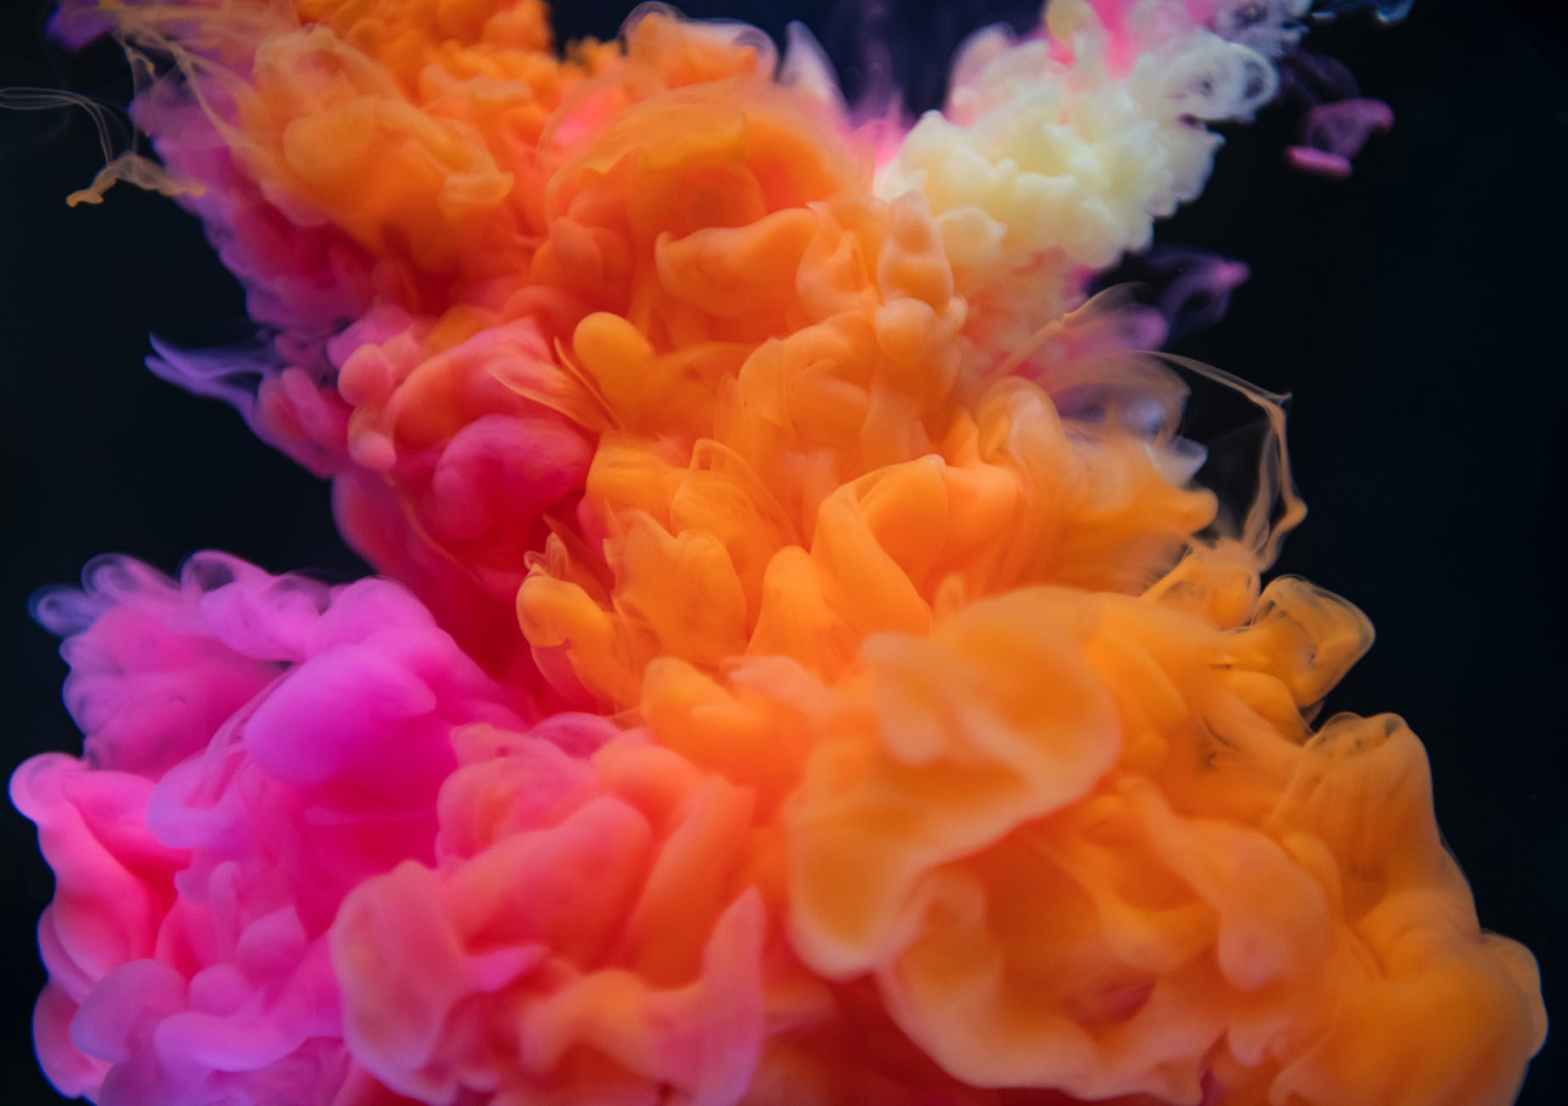 Pink, orange and pale yellow coloured smoke swirl into one another in front of a black background.